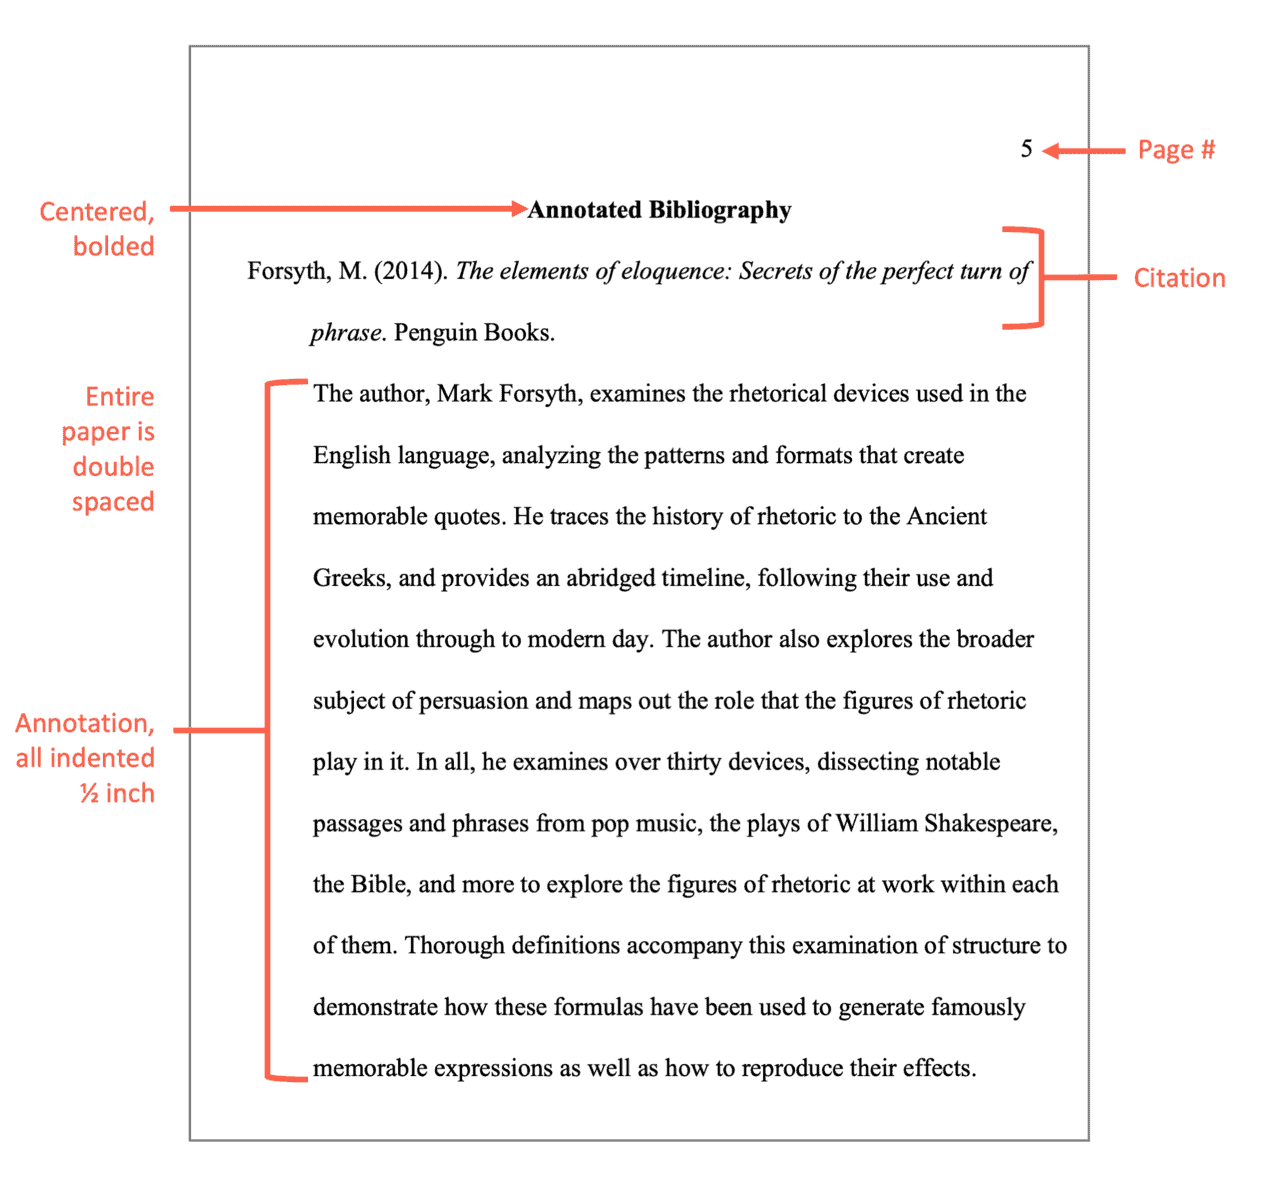 example of annotated bibliography of an article